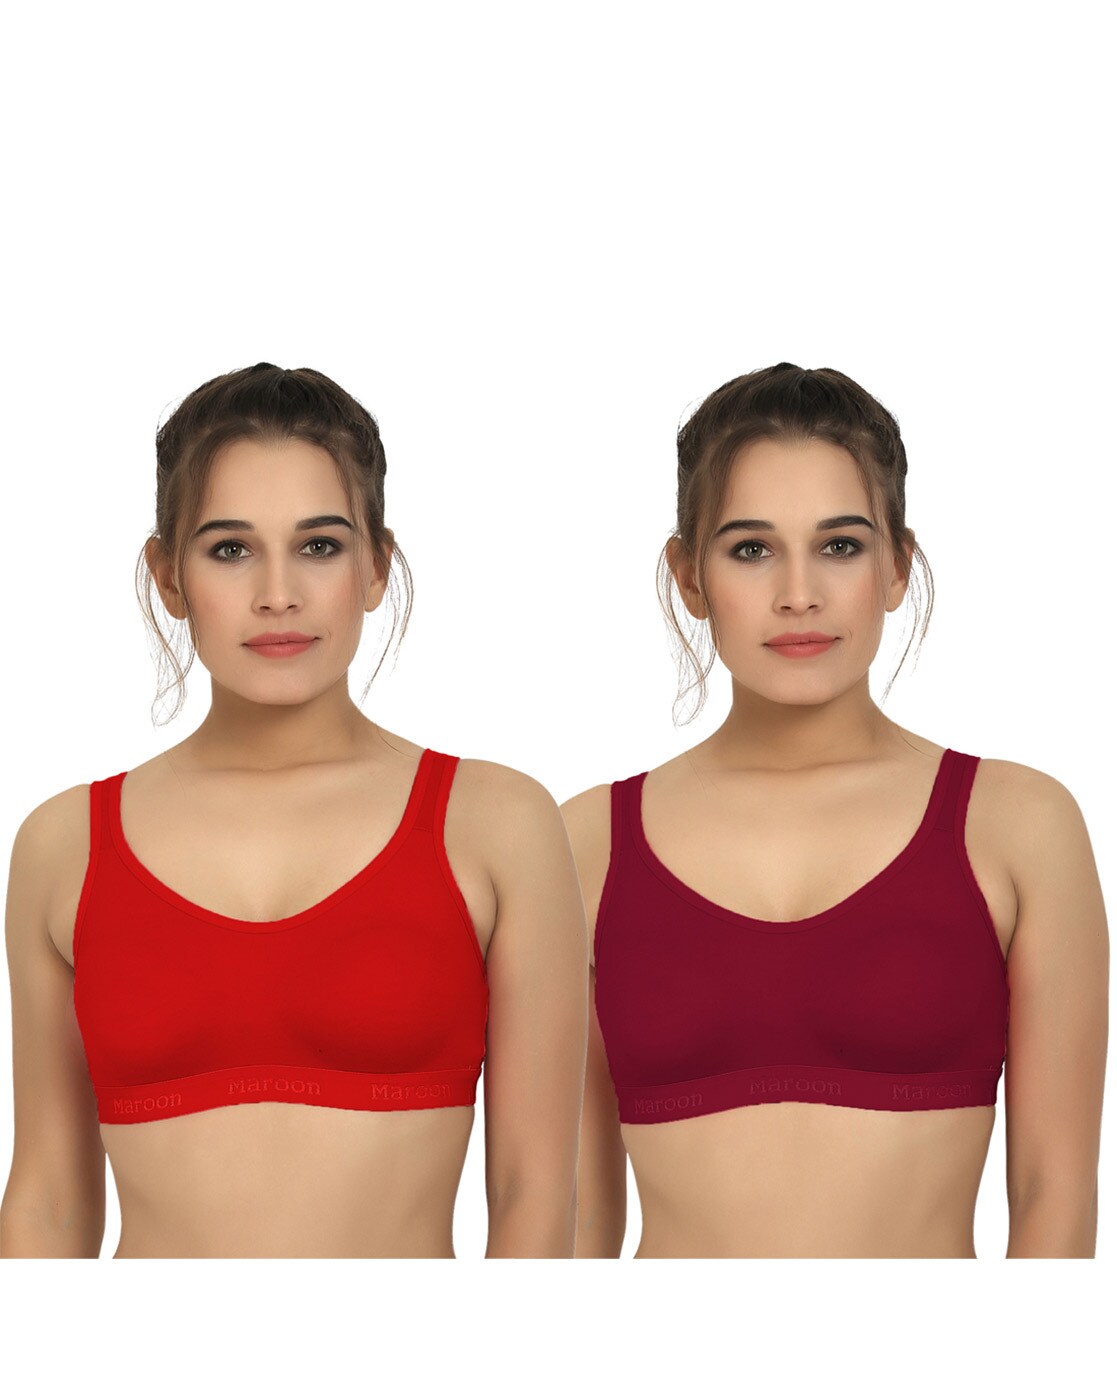 Buy LooksOMG's Cotton Lycra Sports bra in Maroon & Gajri Color Pack of 2.  Online at Best Prices in India - JioMart.